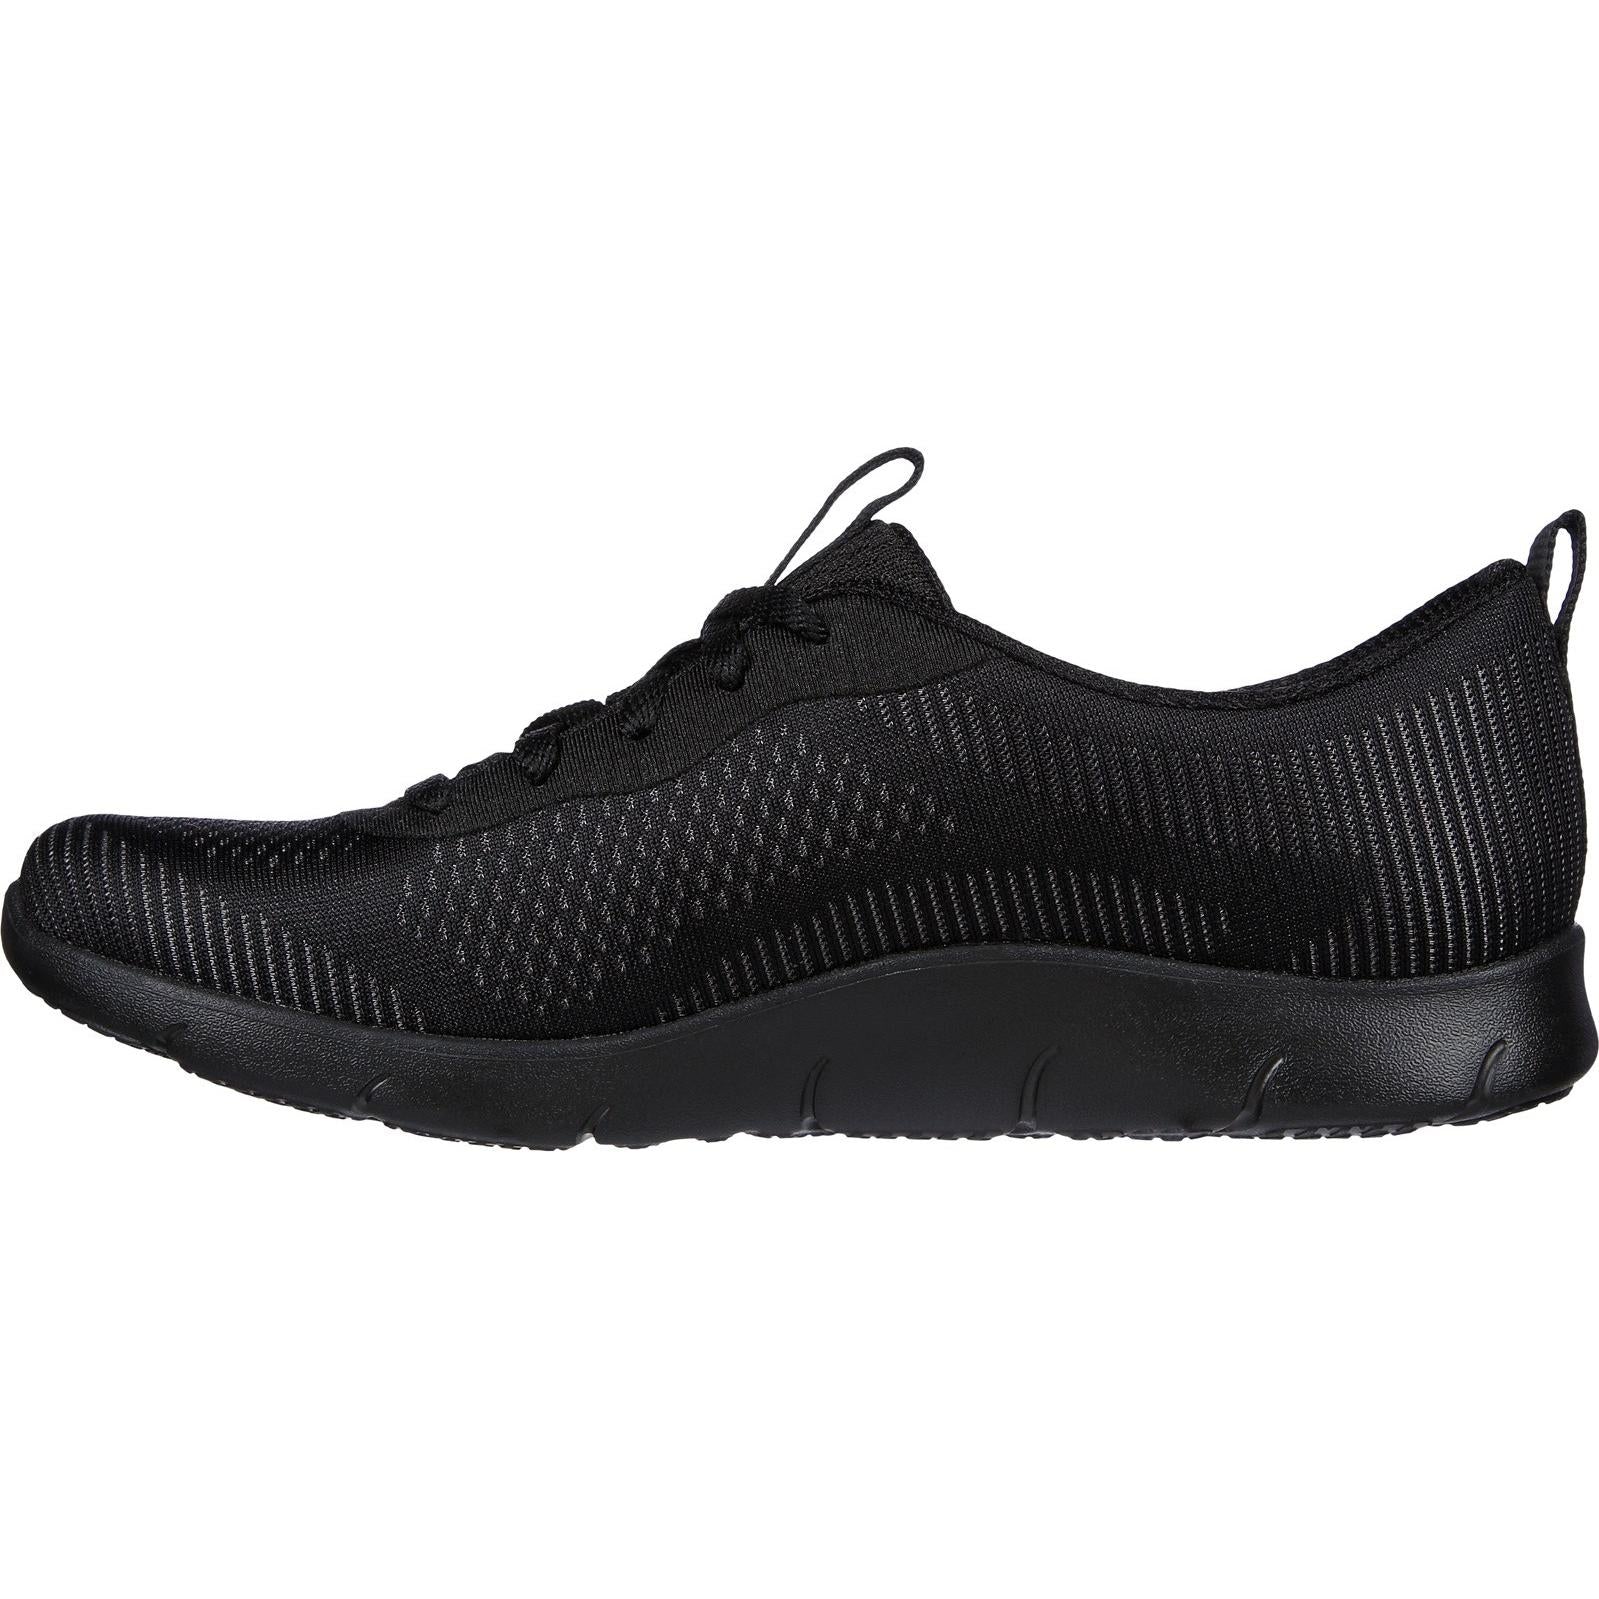 Skechers Arch Fit Refine Classy Doll Trainers